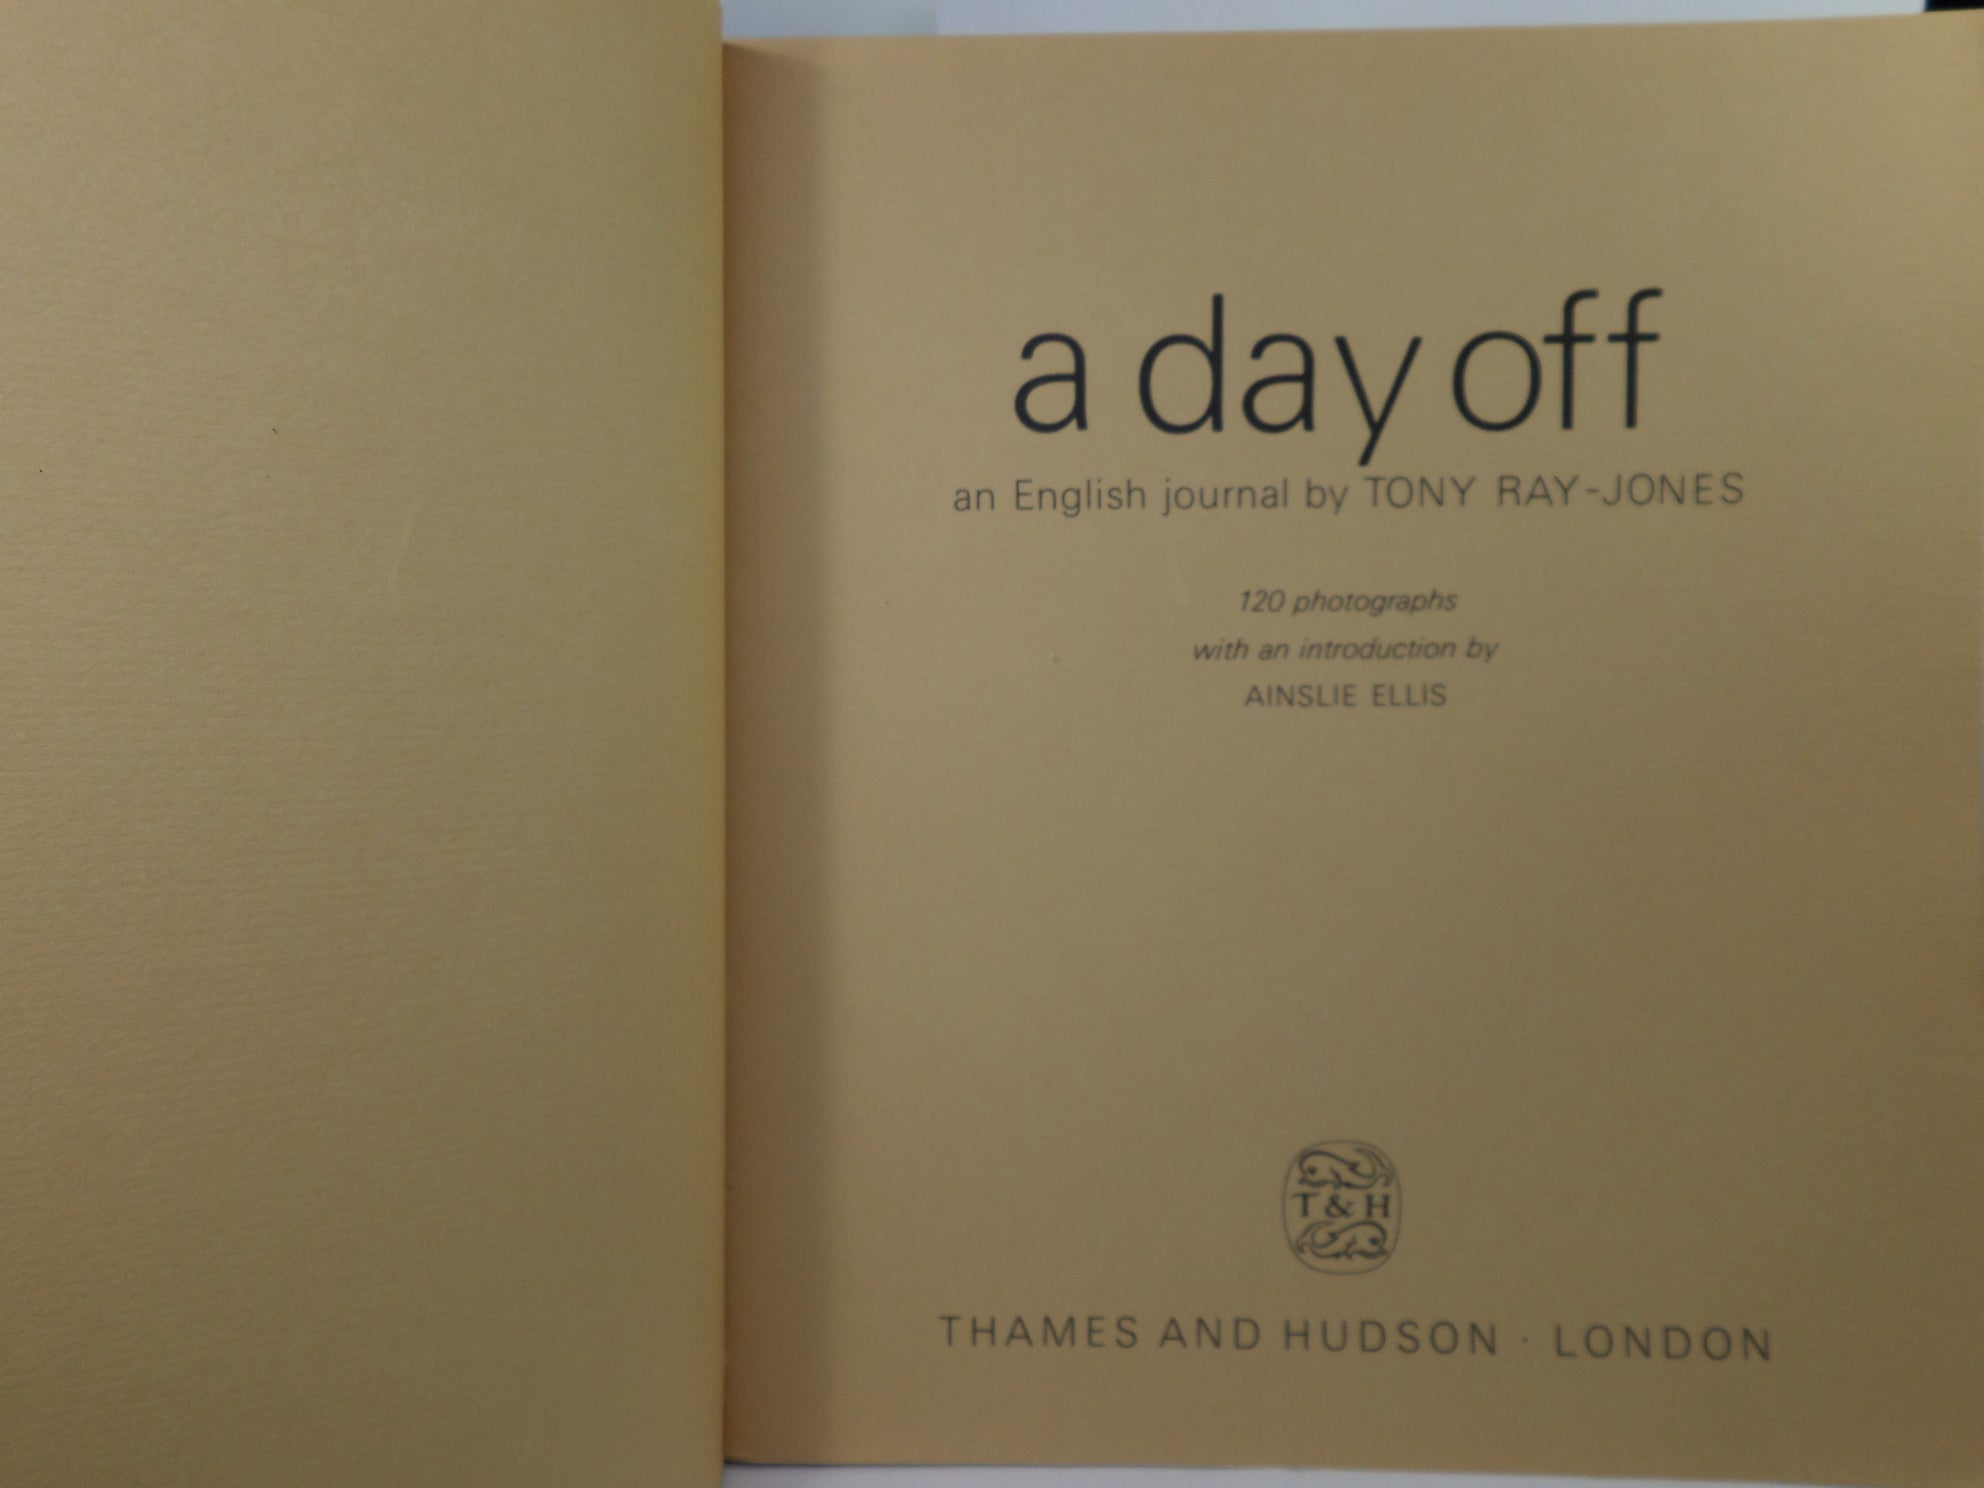 A DAY OFF: AN ENGLISH JOURNAL BY TONY RAY-JONES 1974 FIRST EDITION PAPERBACK